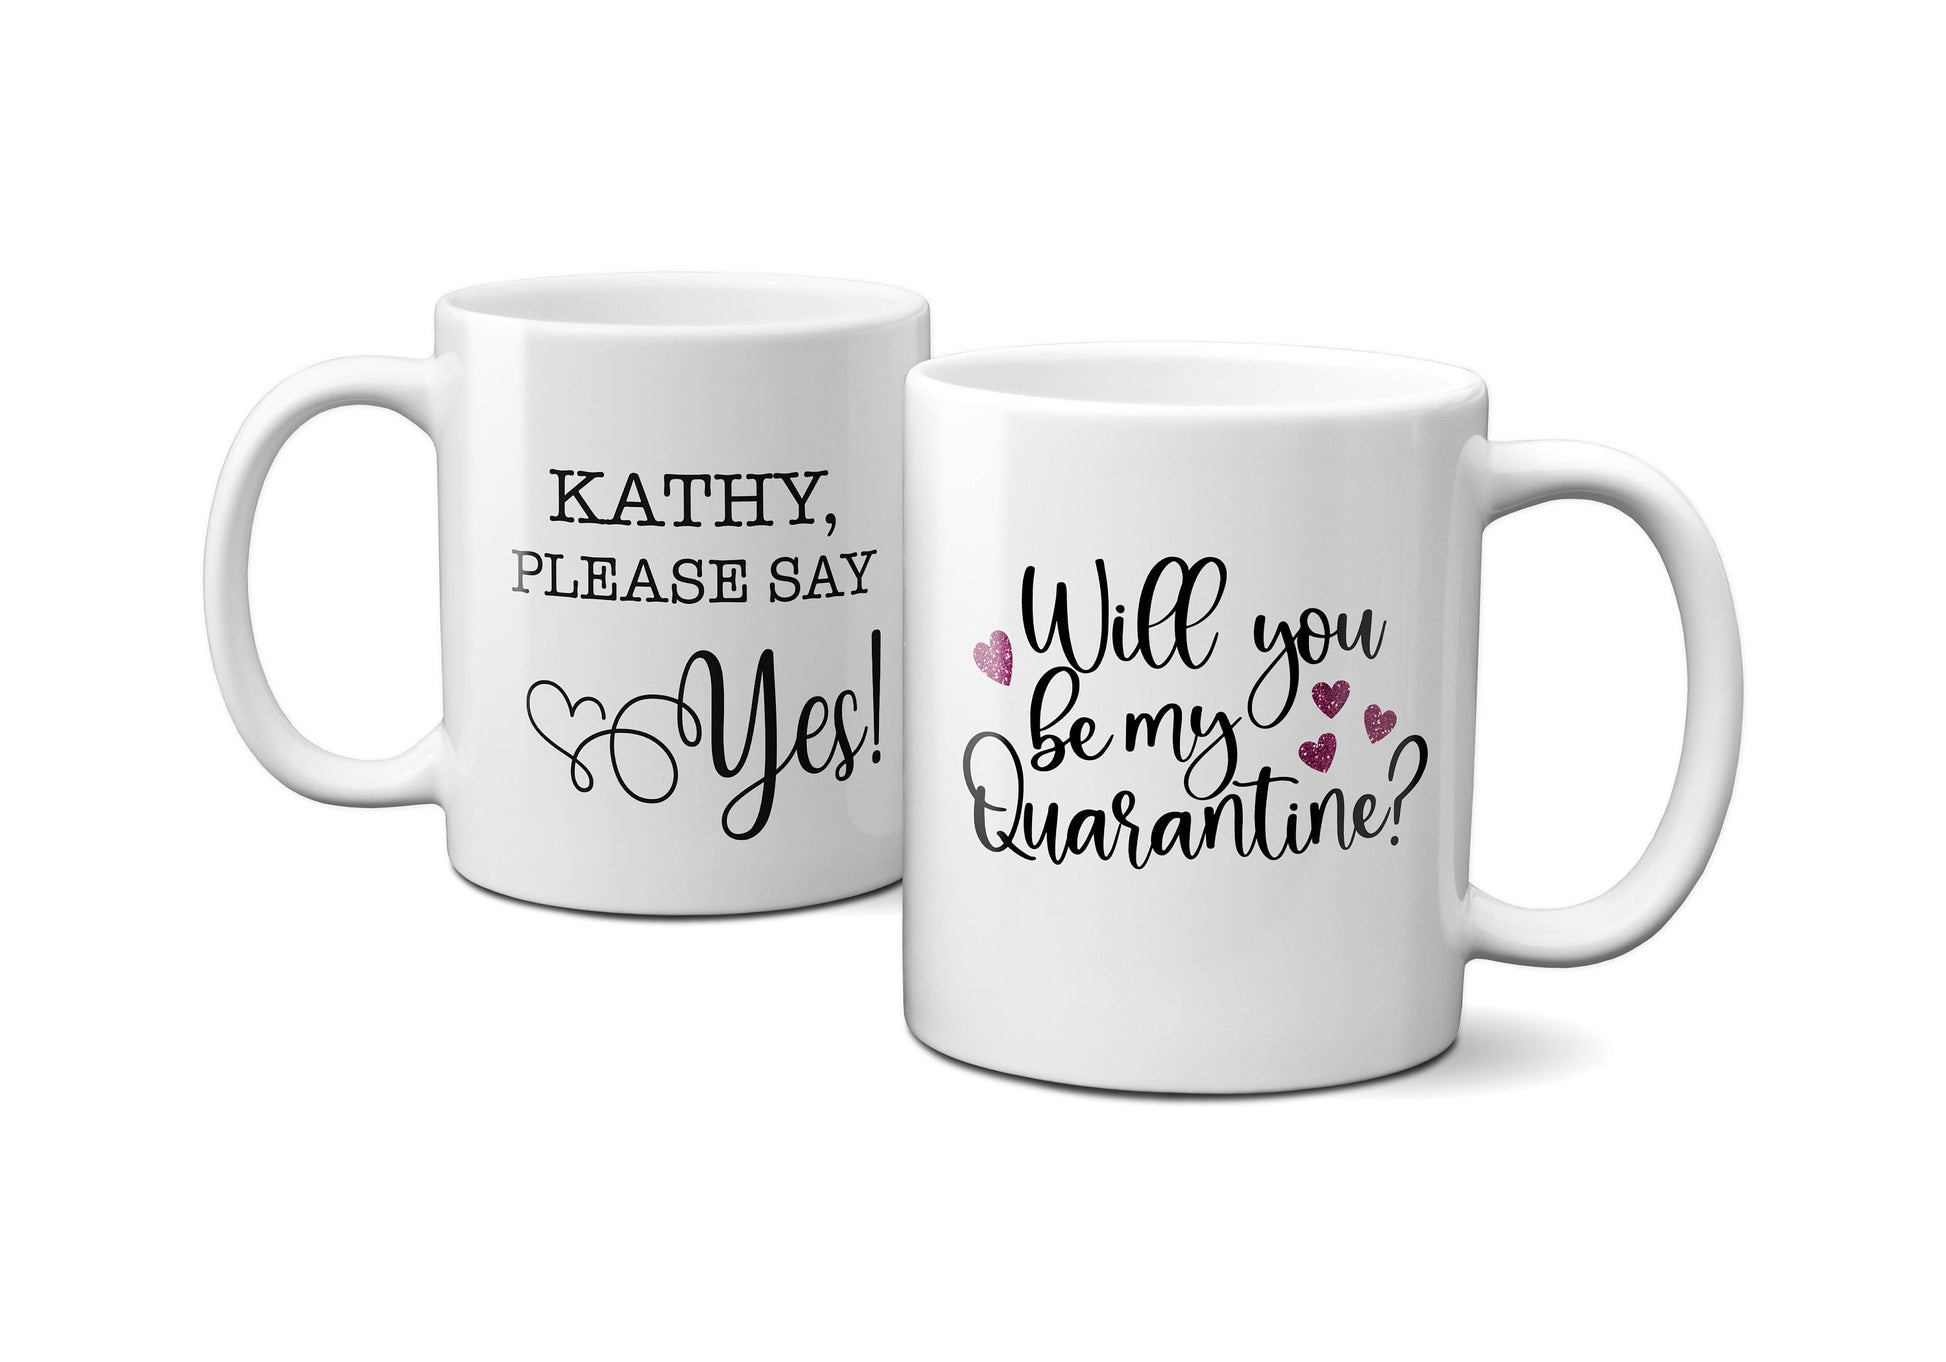 Custom Mugs Will You be my Quarantine Valentine,  Personalized Gifts for Couples Gift Idea - 11 oz.